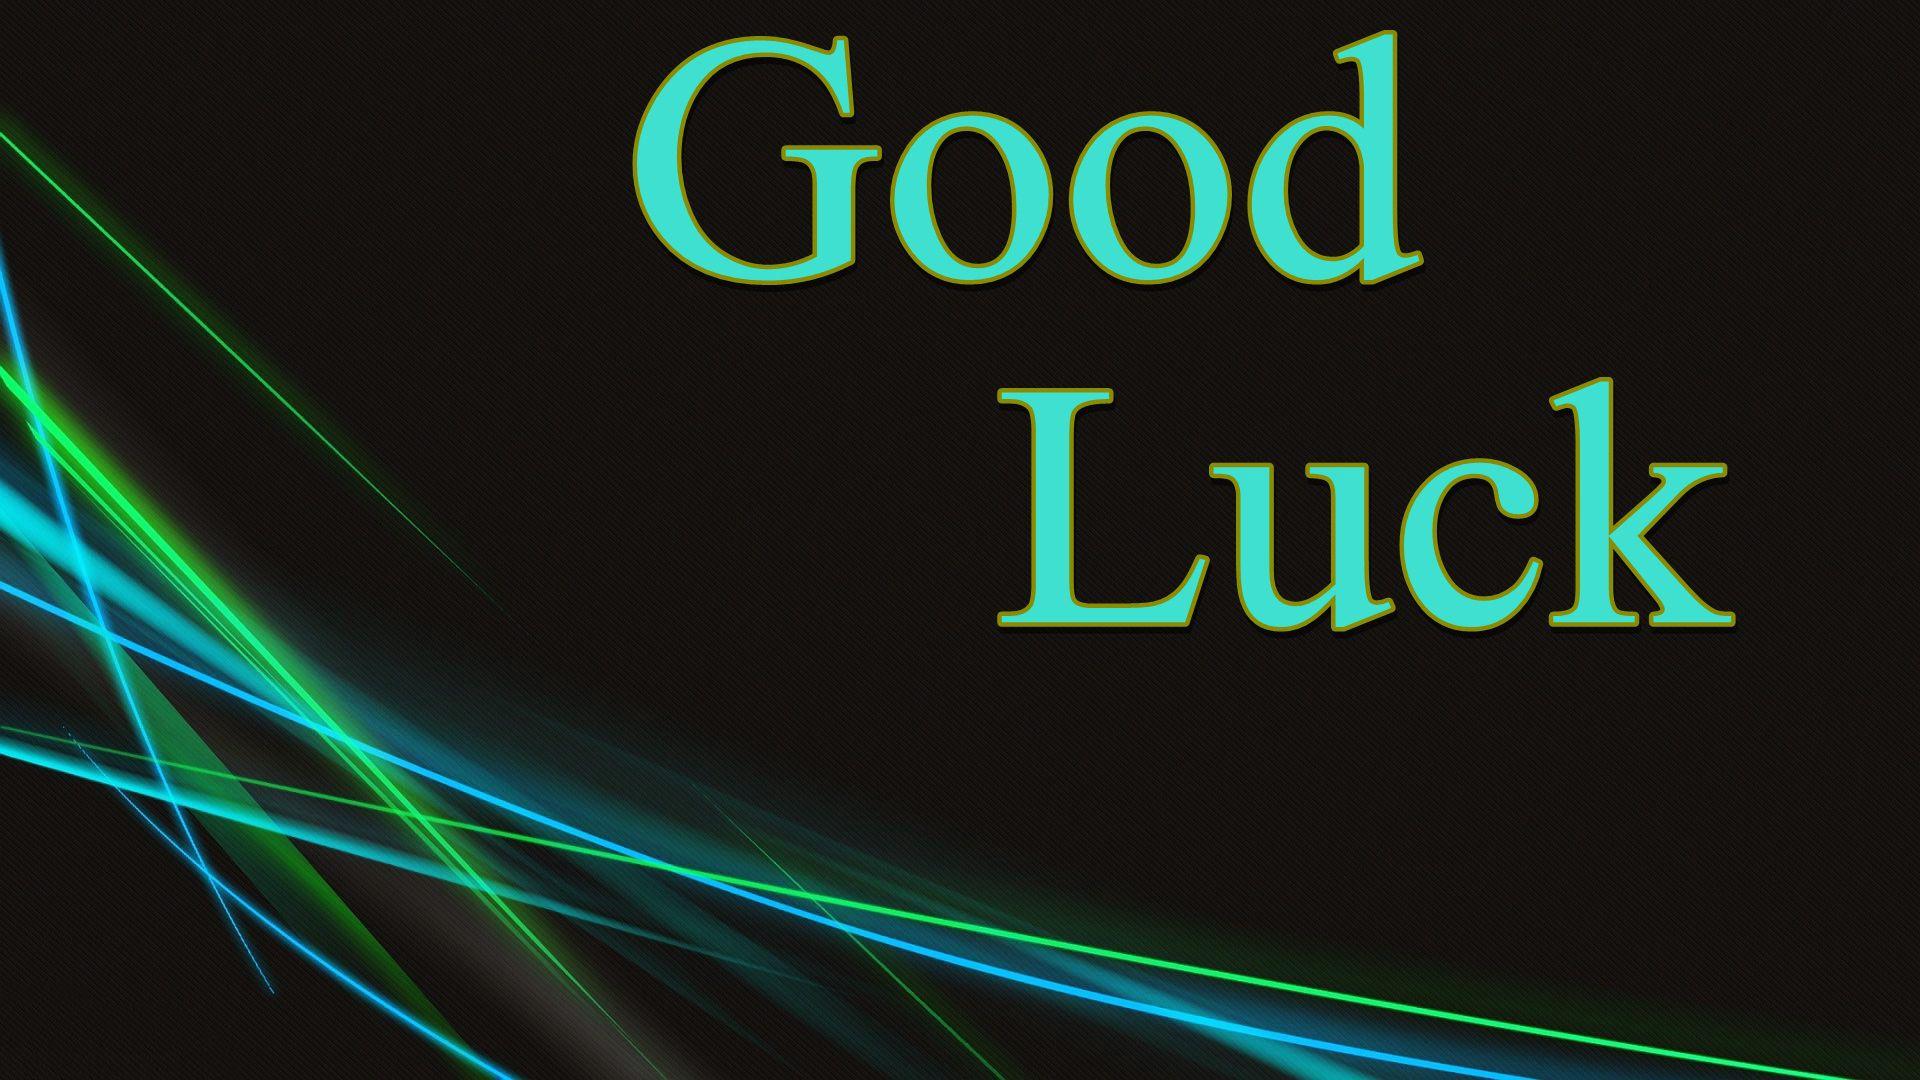 Good luck picture image Good luck picture2